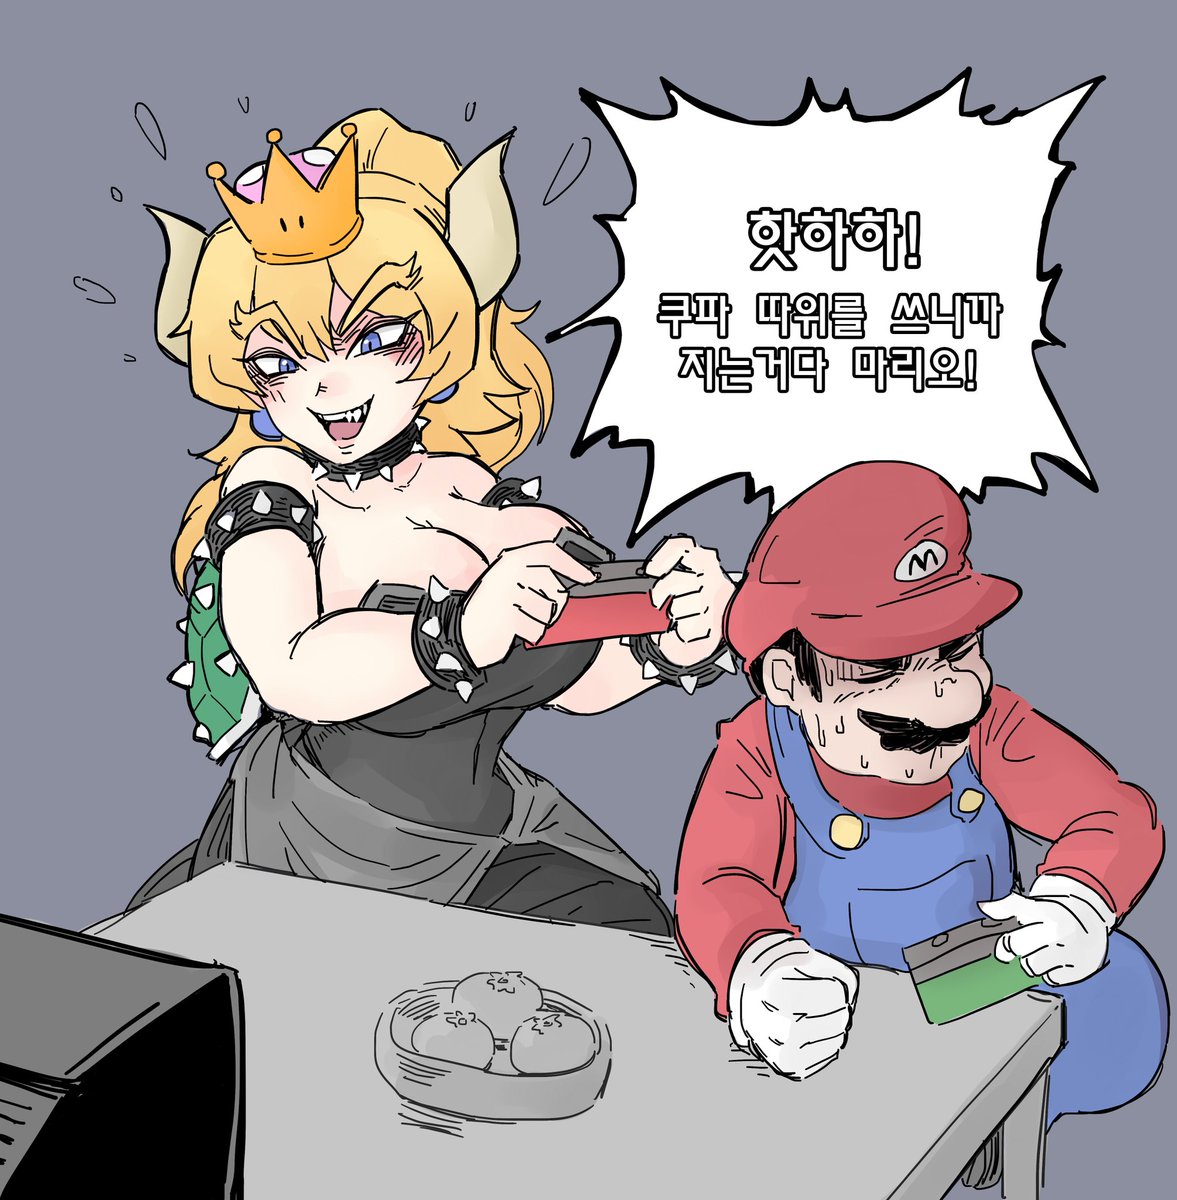 Actually I draw bowsette whenever I got a terrible slump with drawing.

Also I get a slump very often...? 